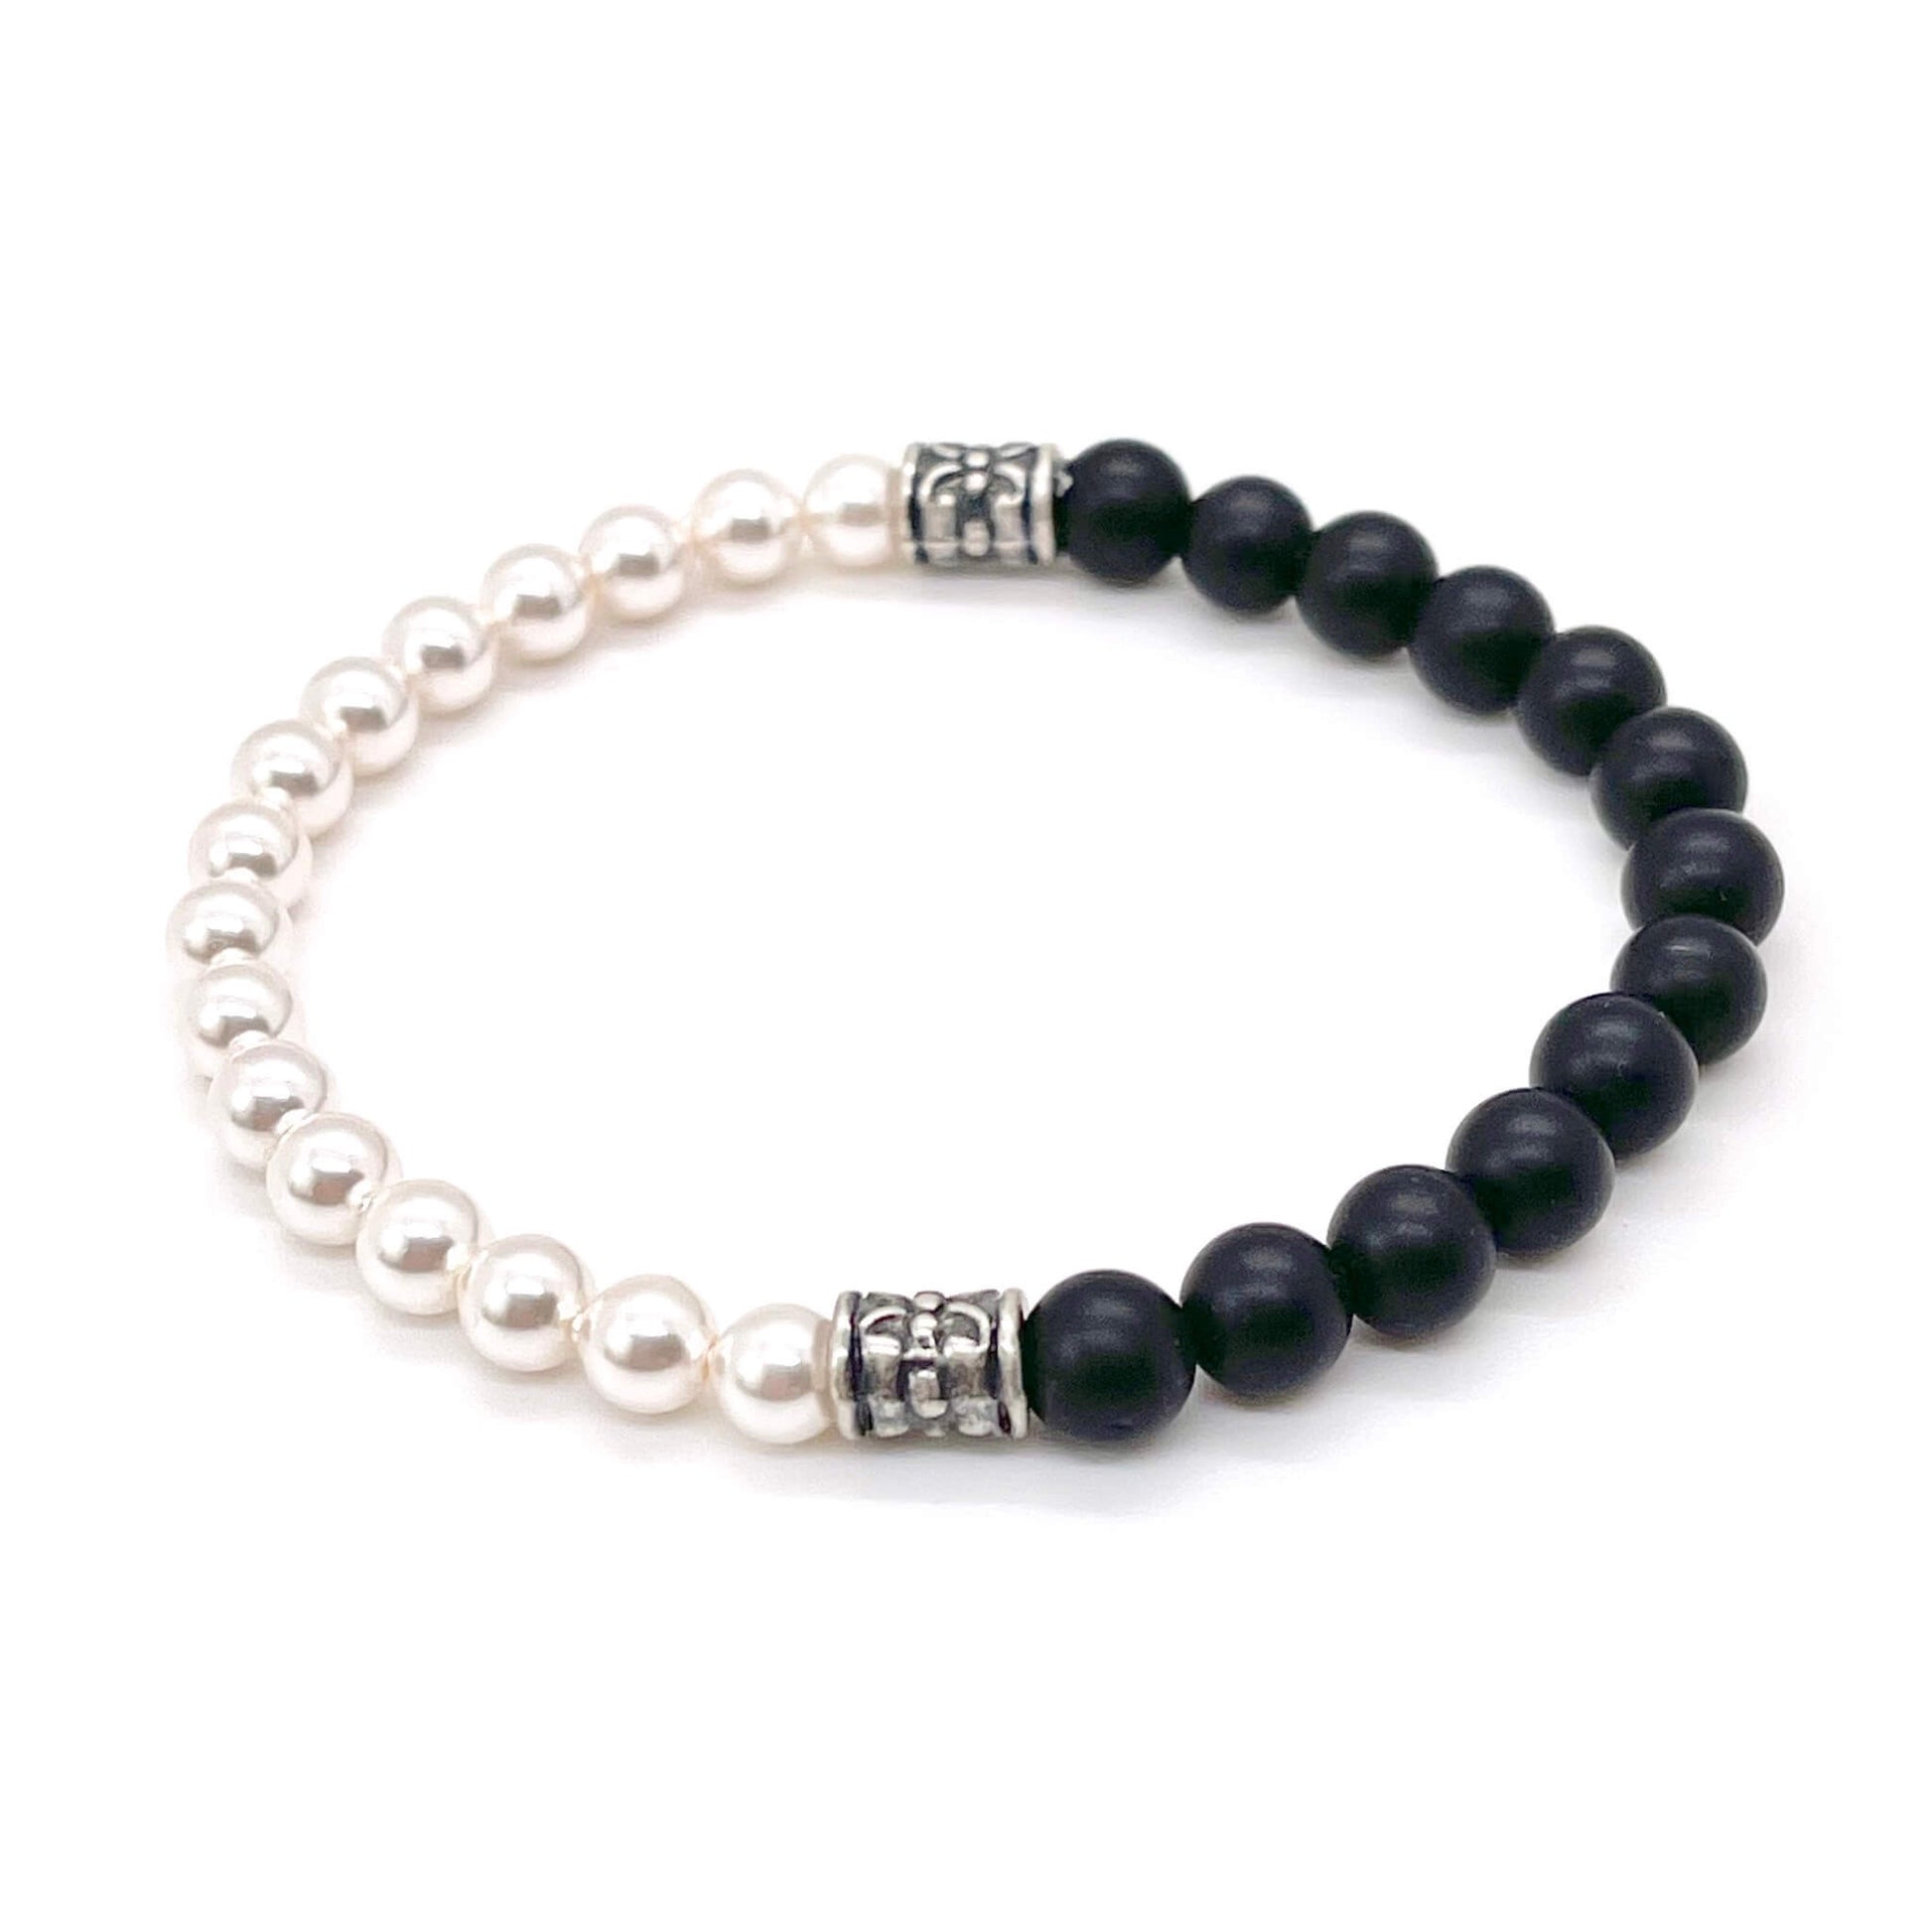 Mens black onyx bracelet with pearls and antique silver-plated tube beads. Mens stretch bracelet.